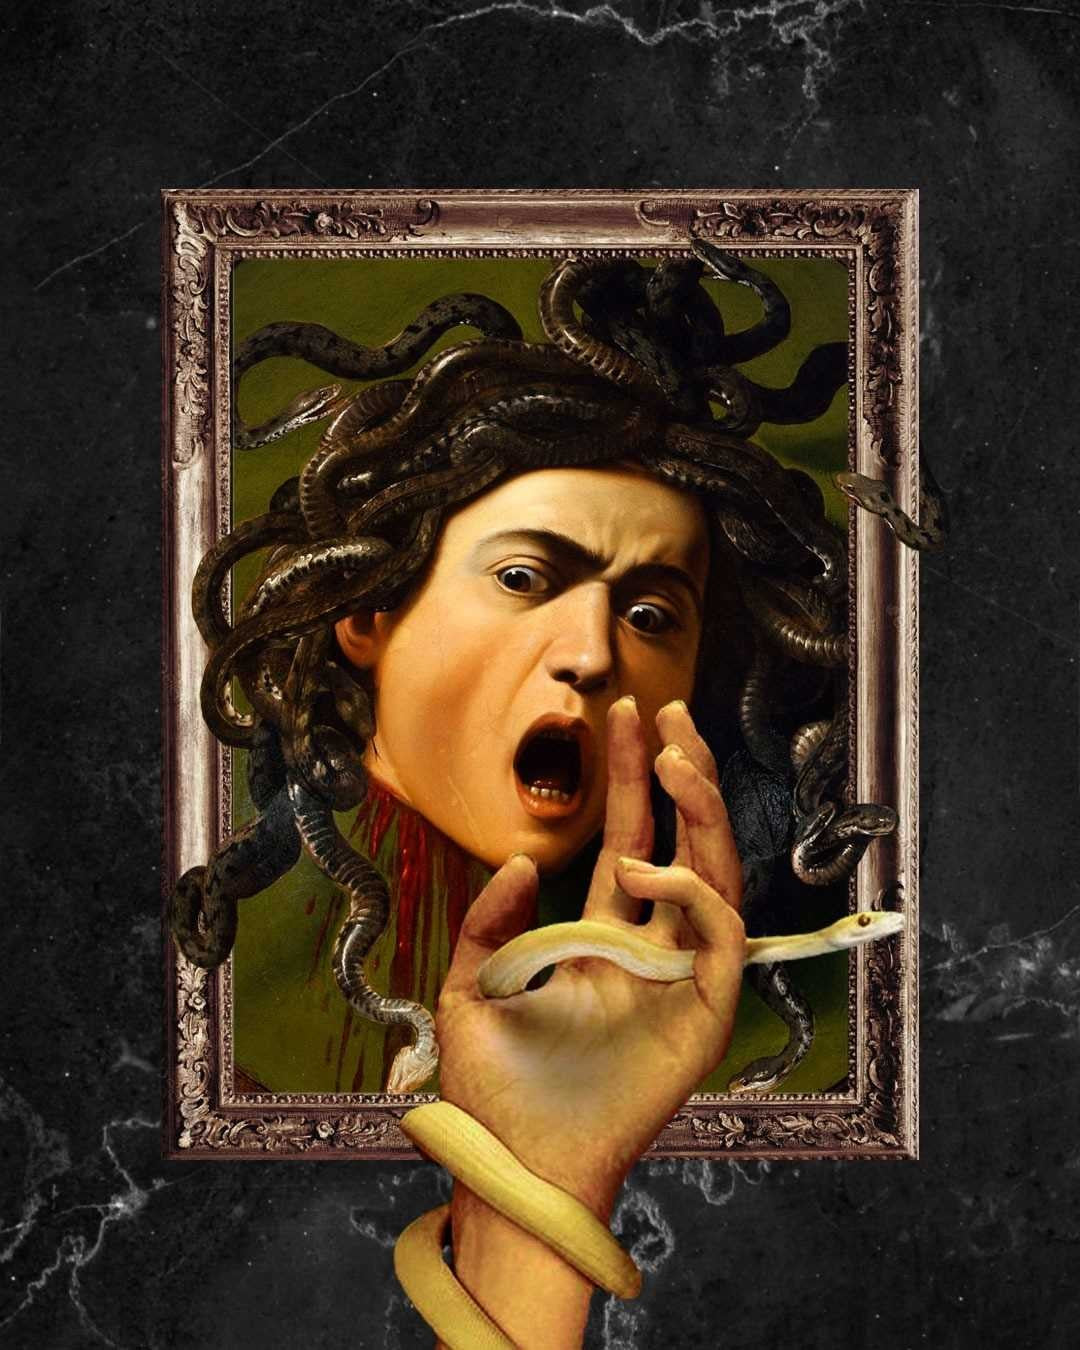 Caravaggio’s Medusa: The Meaning Behind an Italian Masterpiece